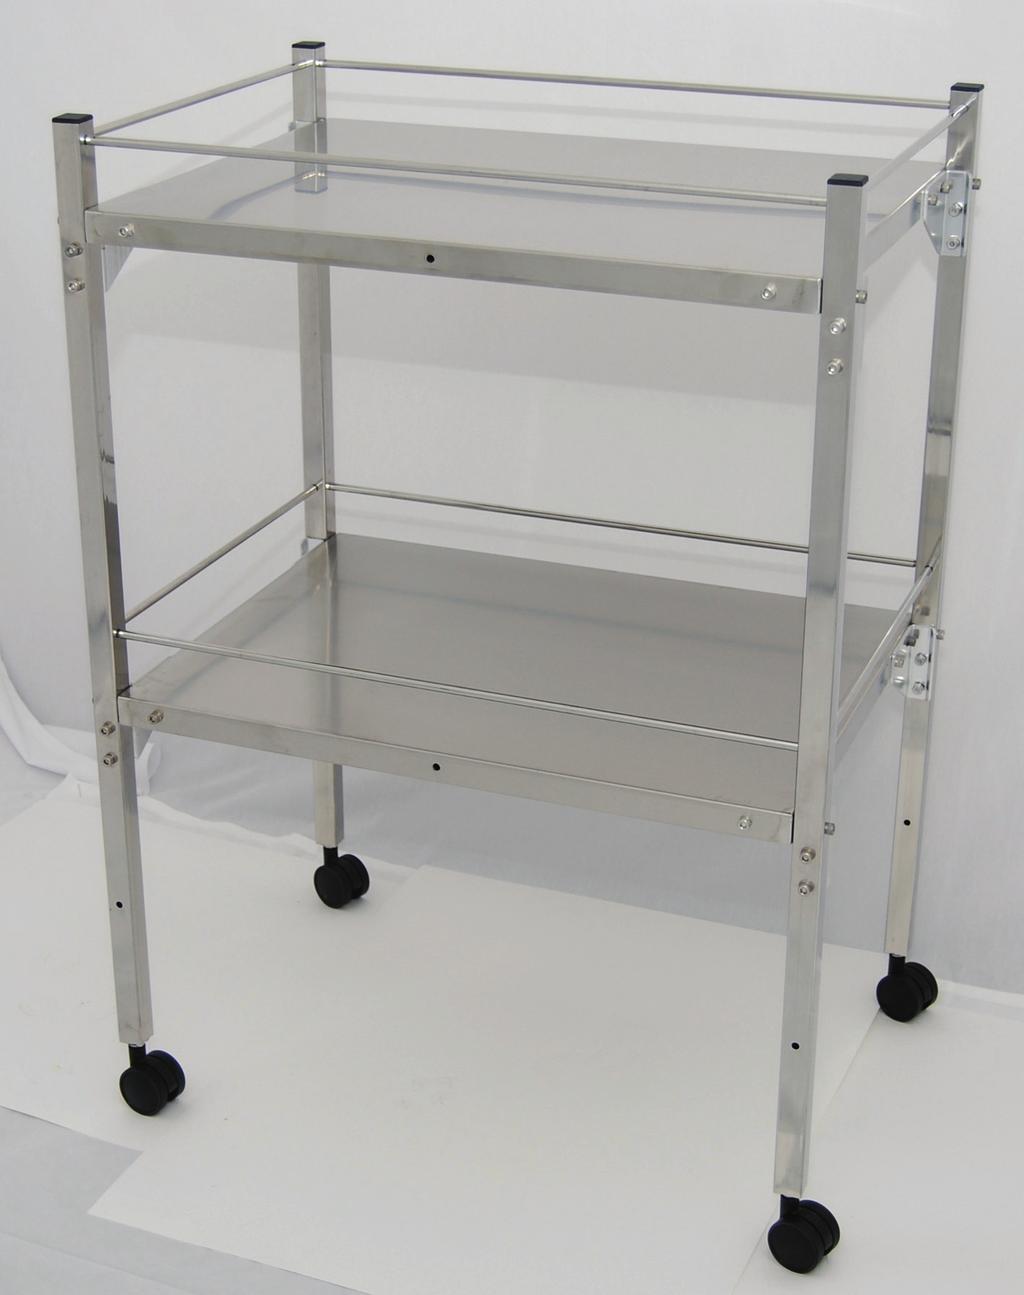 00 ea. Tables/Carts with Two Shelves and Rails Specifications: Constructed of stainless steel 2 Dual Wheel Casters With Rails 36 3/4 High Assembly Required Can be assembled for additional $50.00. 5 Years on Frame 1 Year on Moving Parts TA-5013 18 x 24 $685.